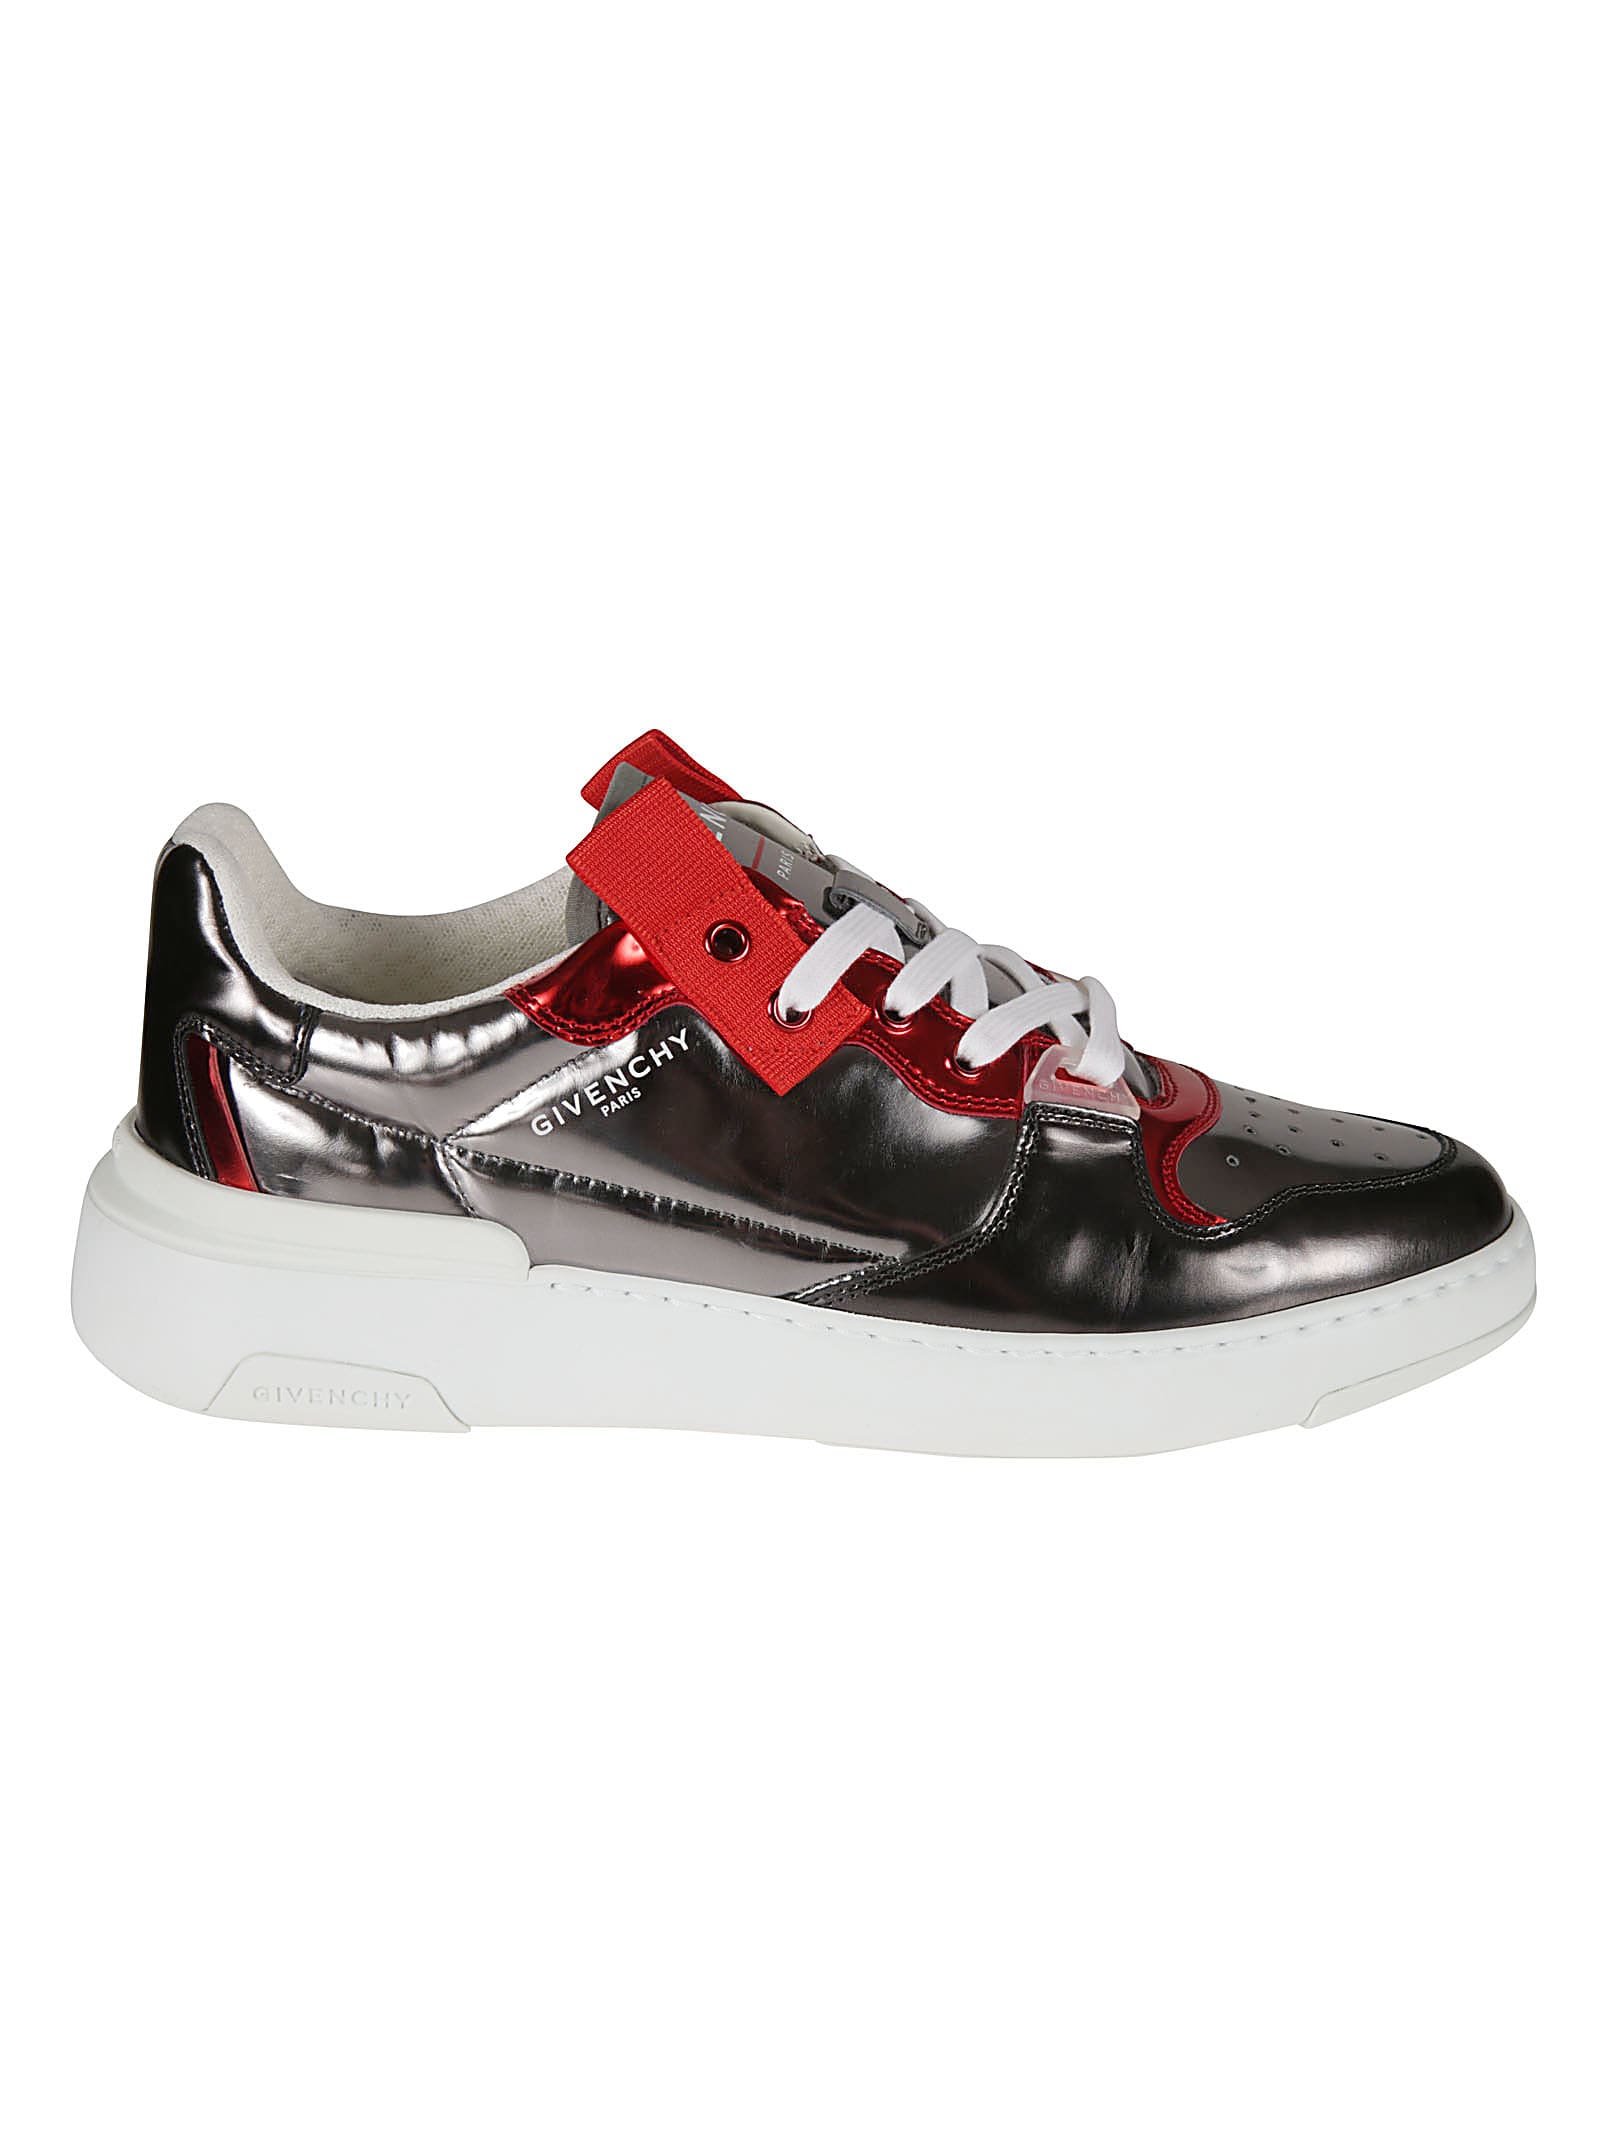 GIVENCHY WING LOW-TOP SNEAKERS,BH002K H0SQ061